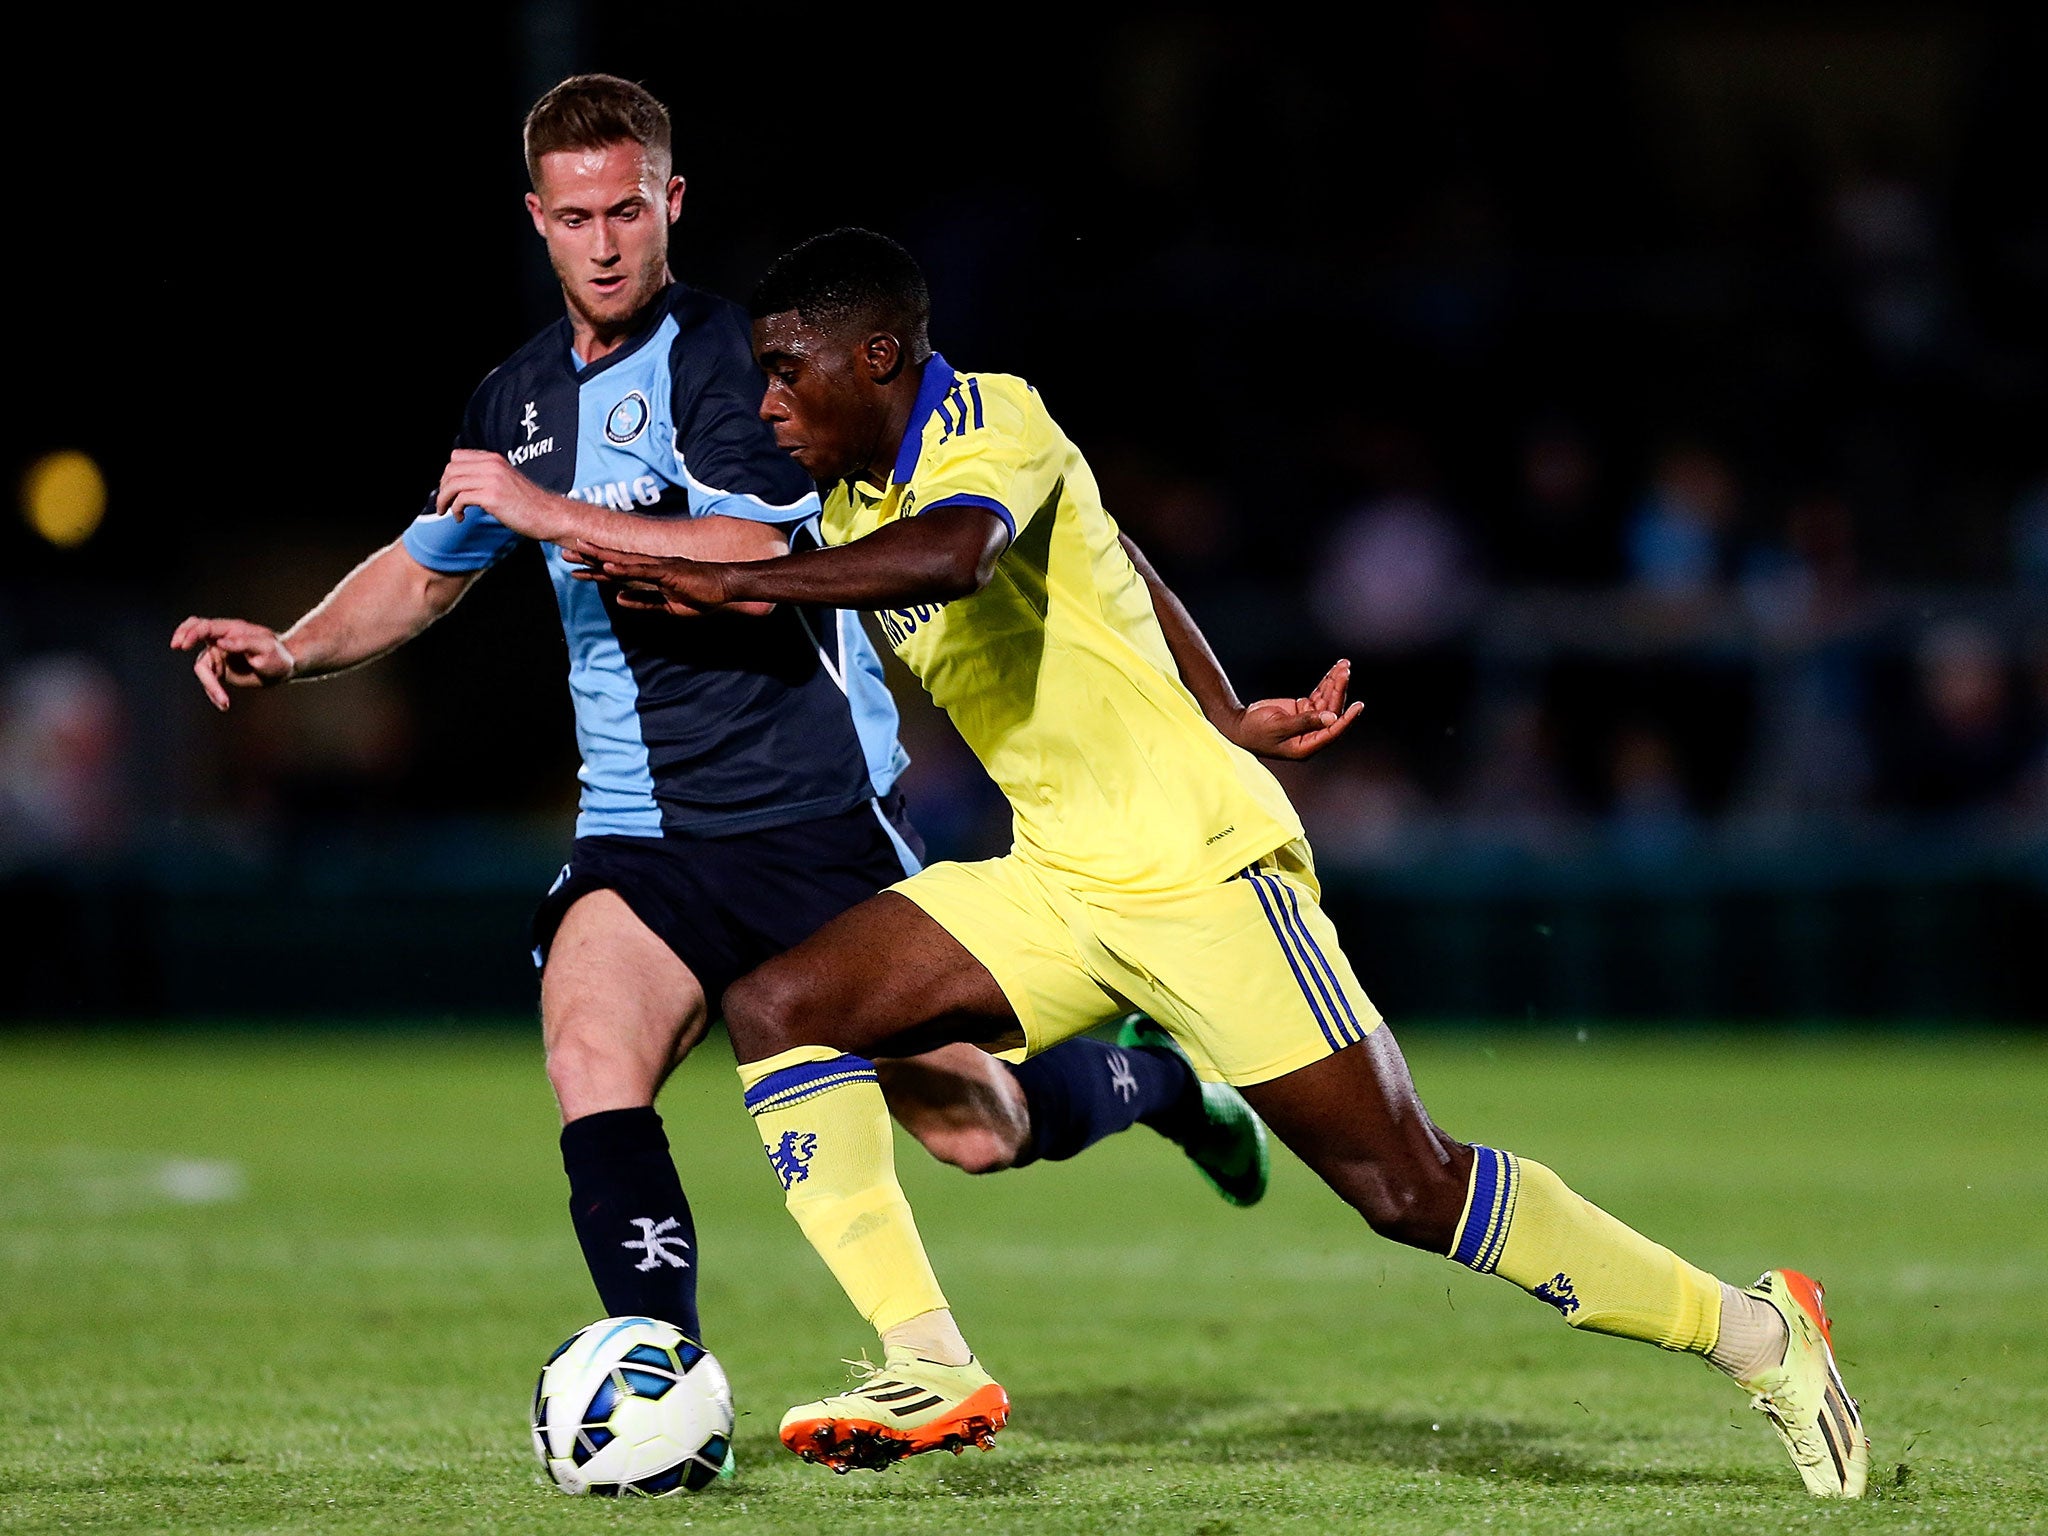 Jeremie Boga of Chelsea advances under pressure from Nathan Evans of Wycombe duing the pre season friendly match between Wycombe Wanderers and Chelsea at Adams Park